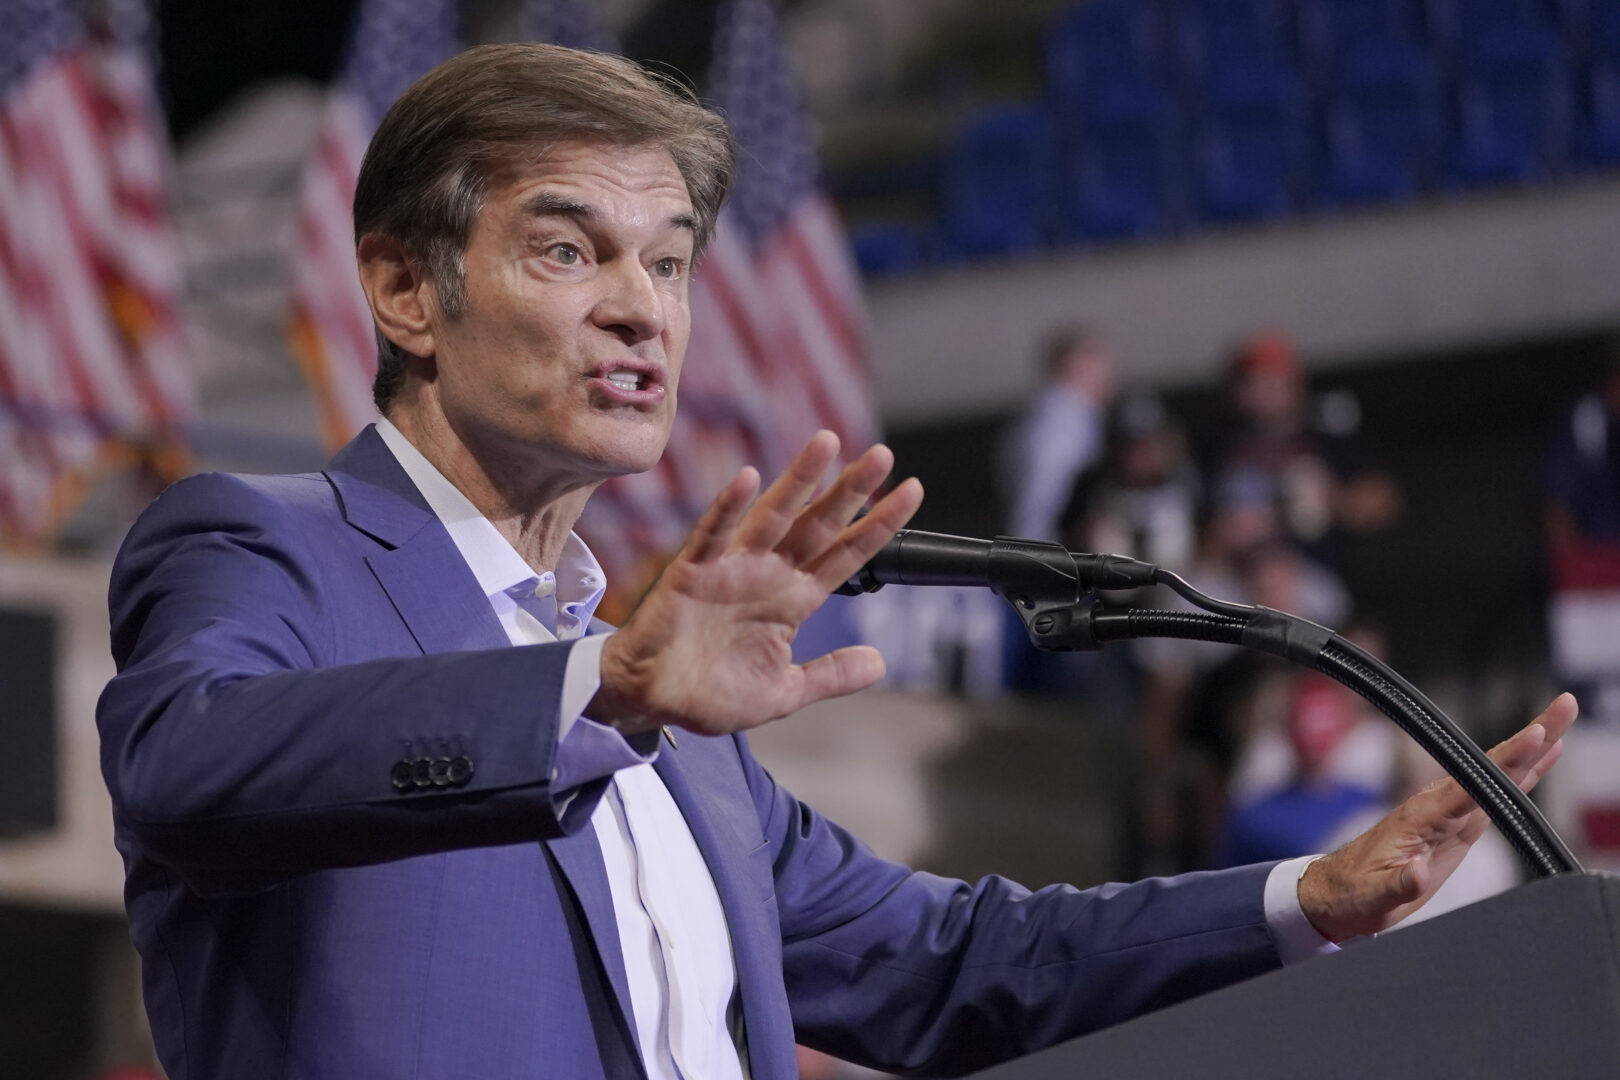 Pennsylvania Republican Senate candidate Mehmet Oz speaks ahead of former President Donald Trump at a rally in Wilkes-Barre, Pa., Saturday, Sept. 3, 2022. 